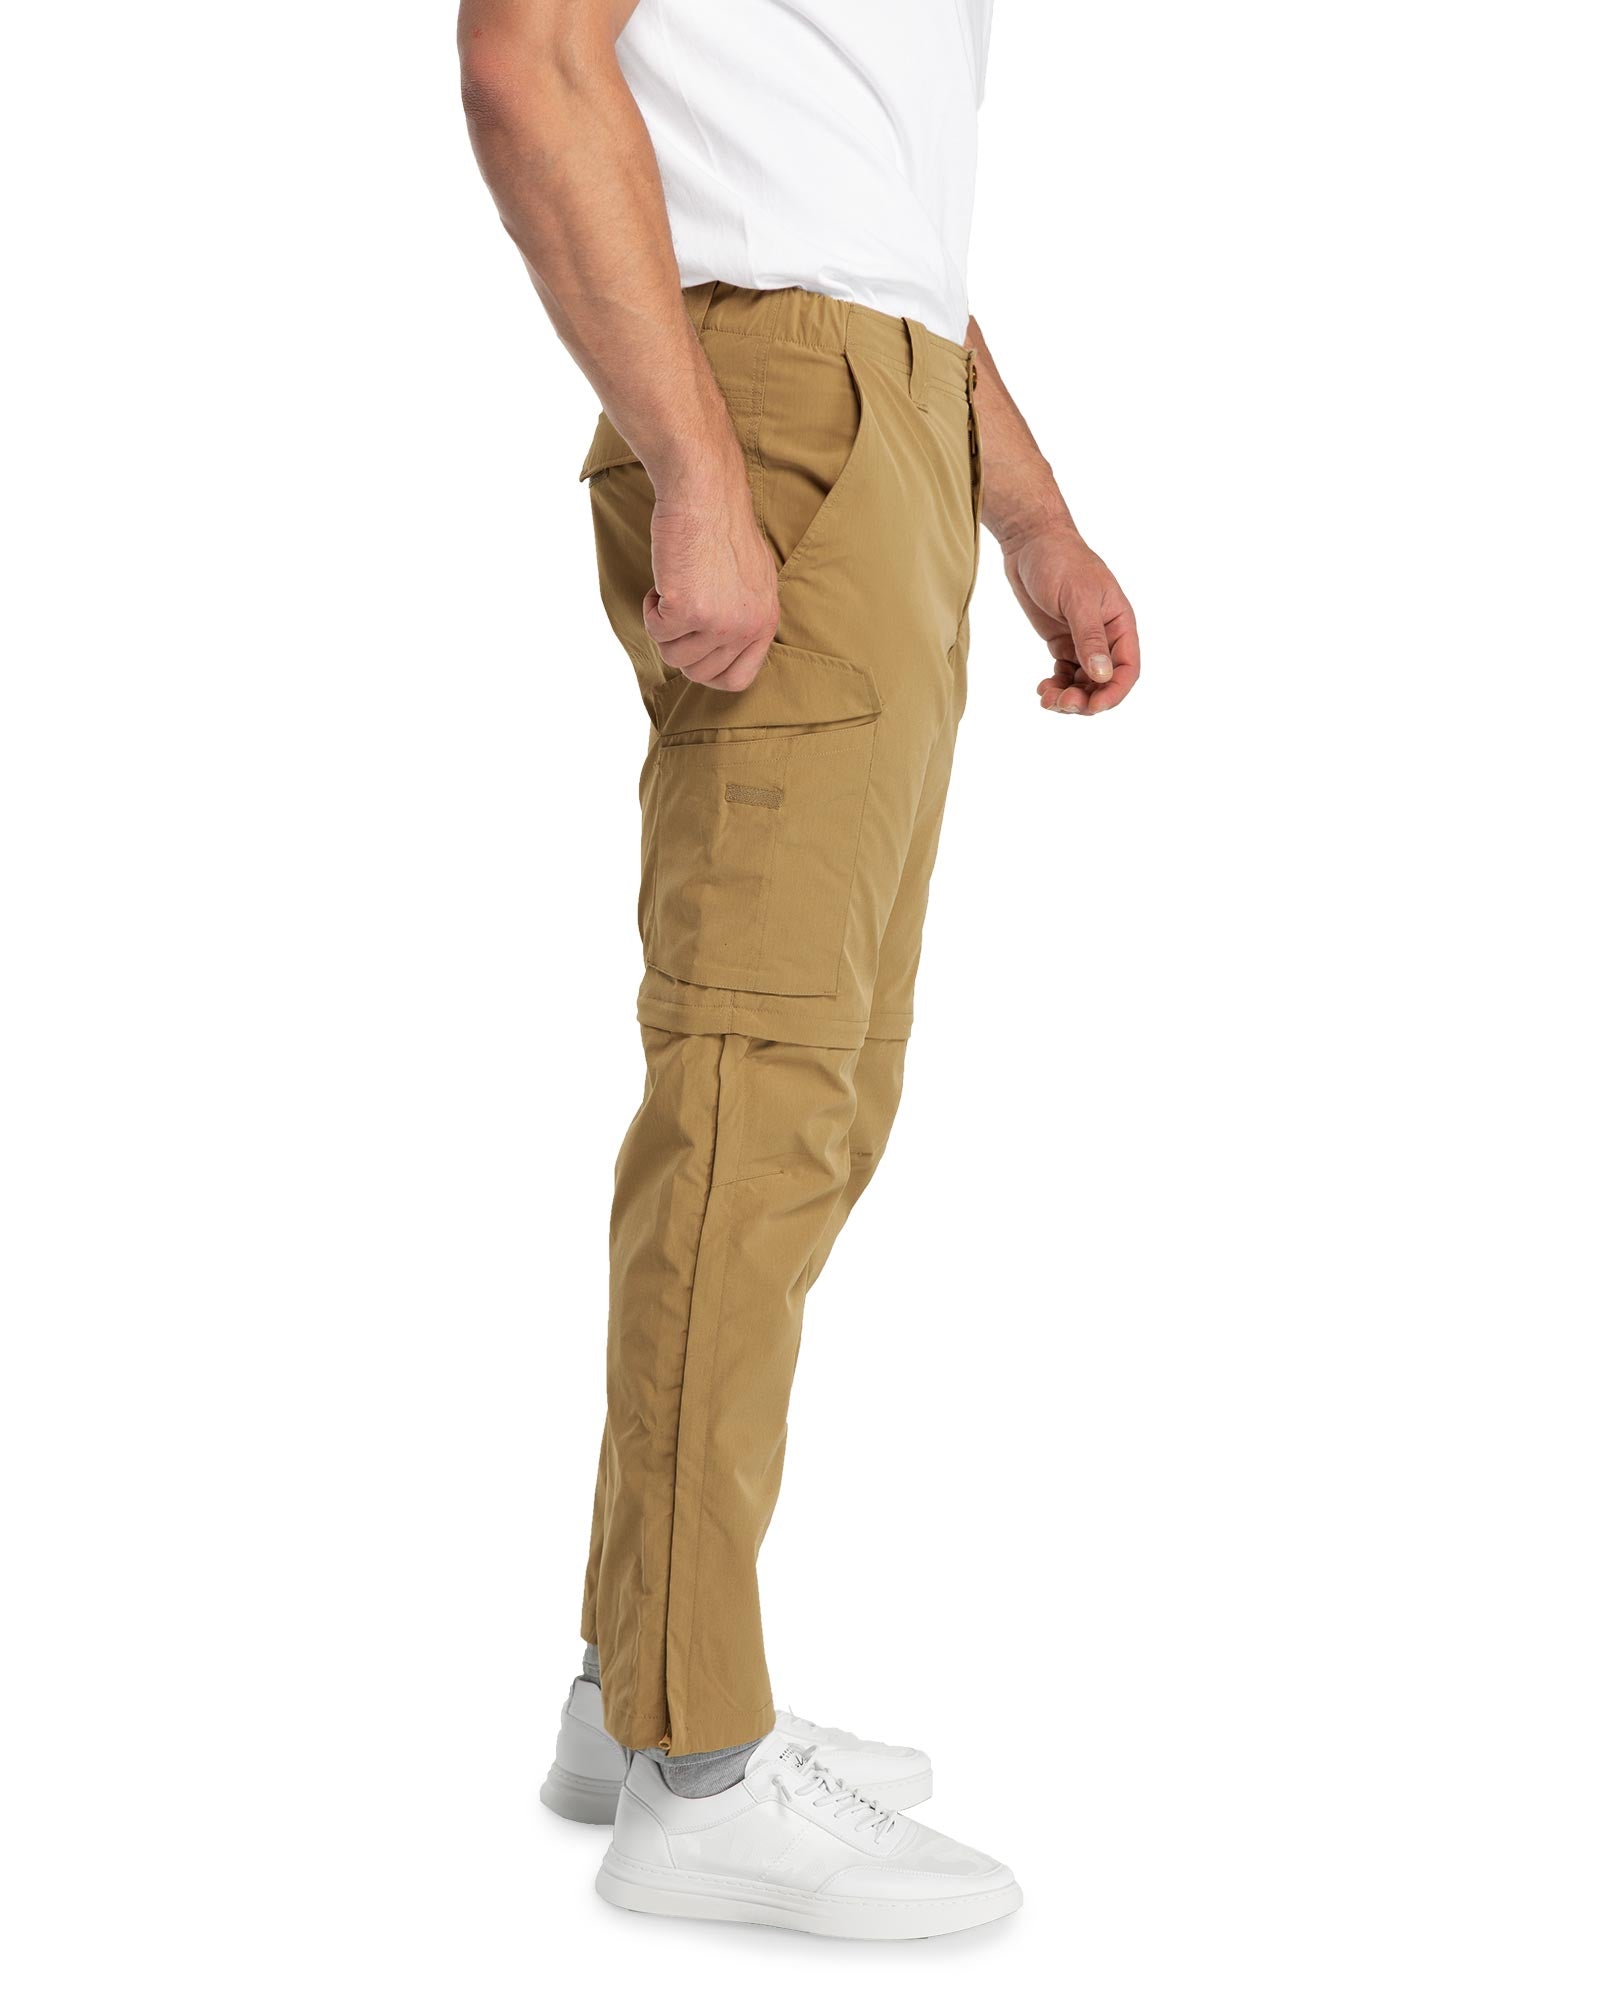 33,000ft Men's Convertible Hiking Pants, Quick Dry Stretch Zip-Off